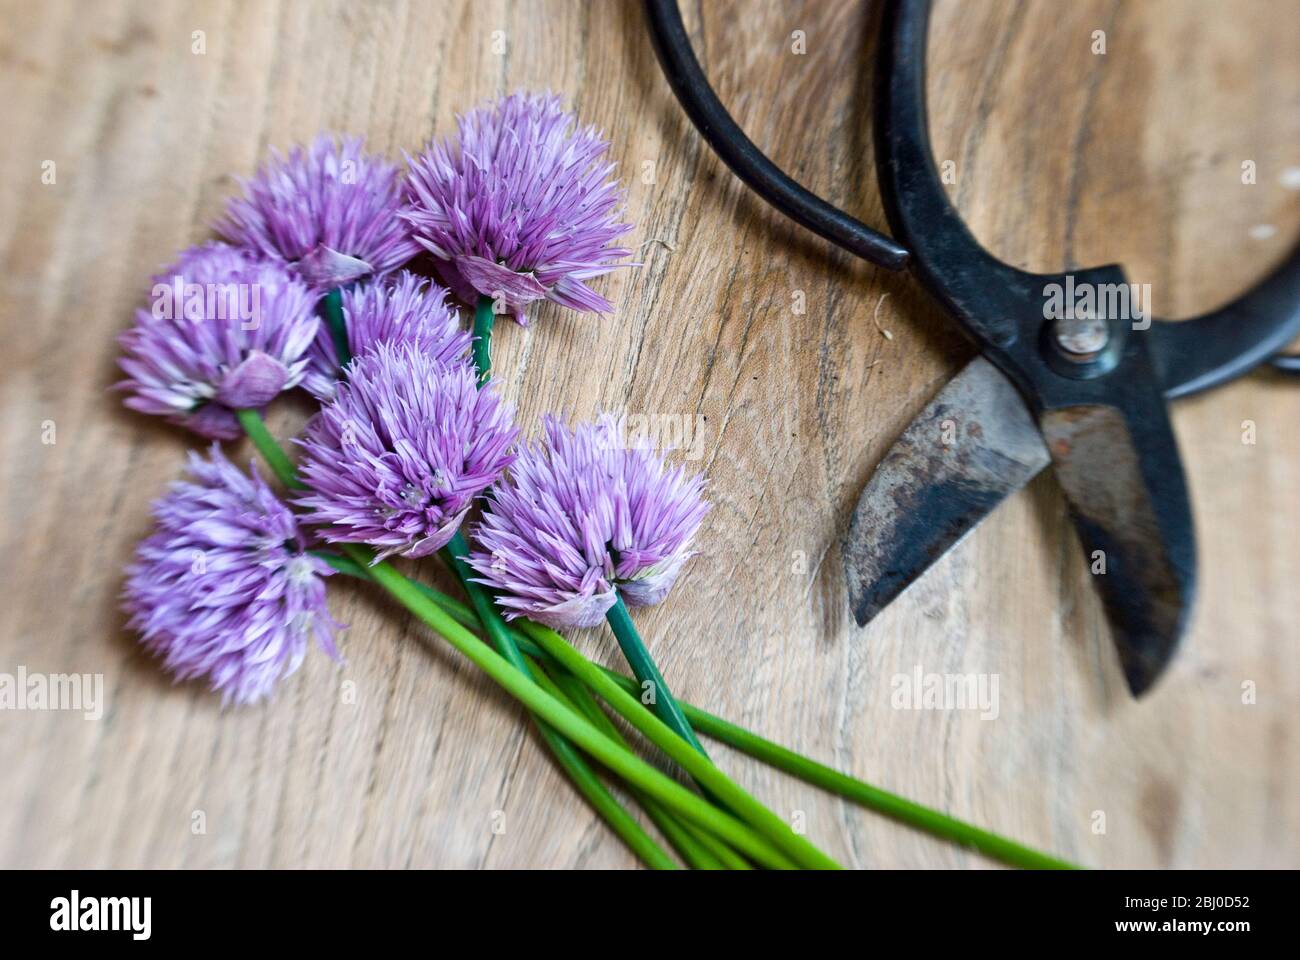 Cut chives on wooden surface with Japanese scissors - Stock Photo